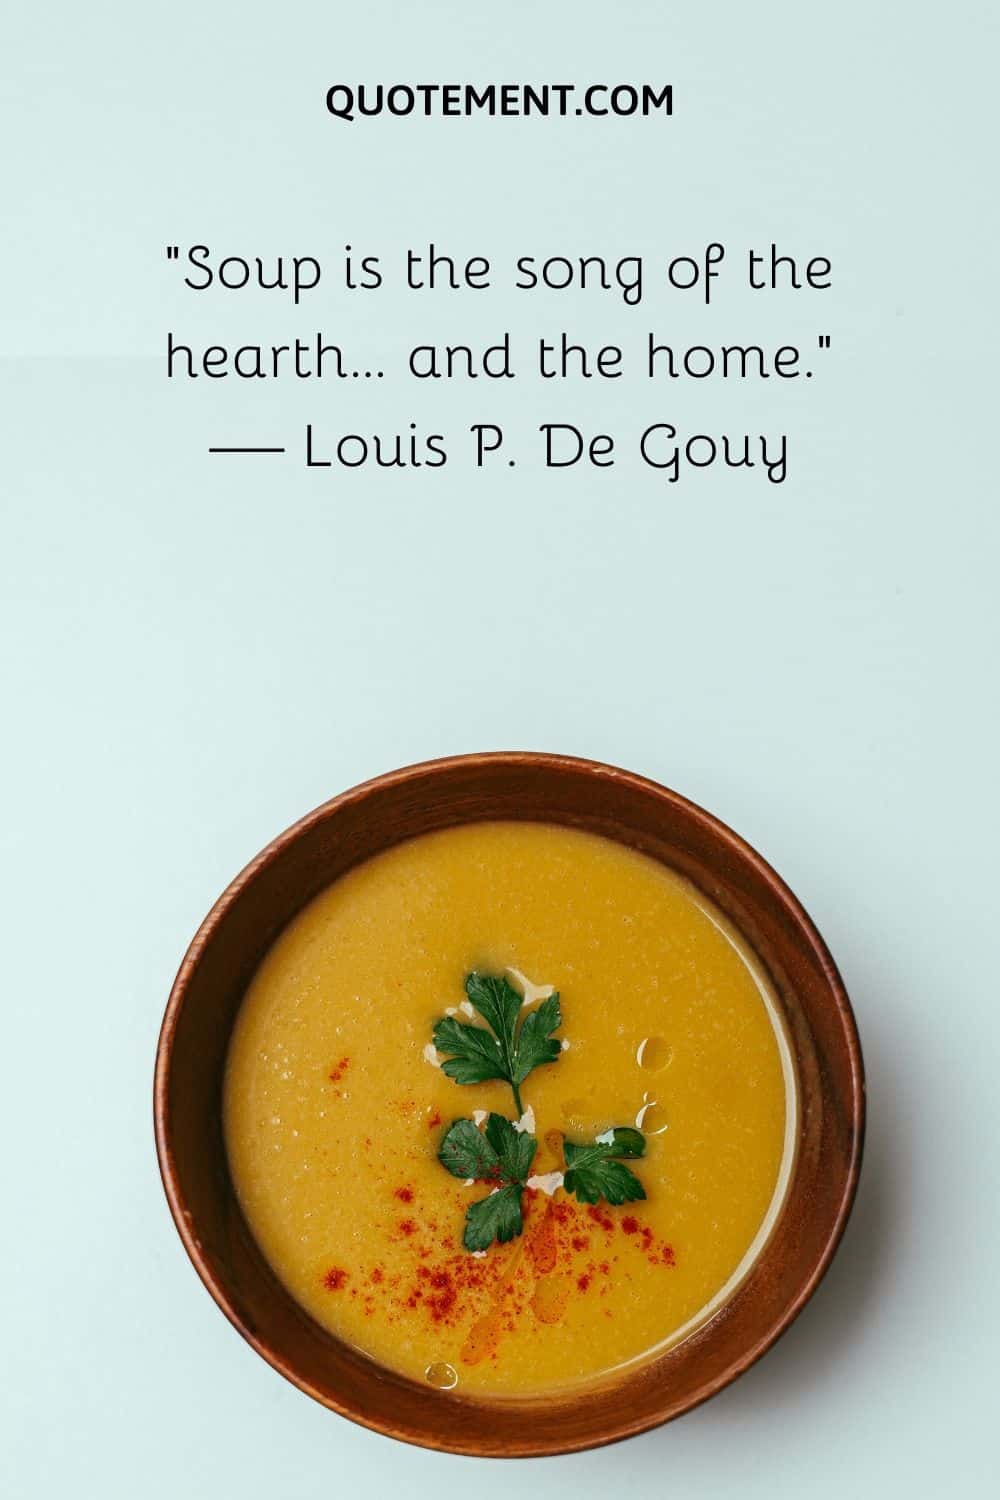 Soup is the song of the hearth